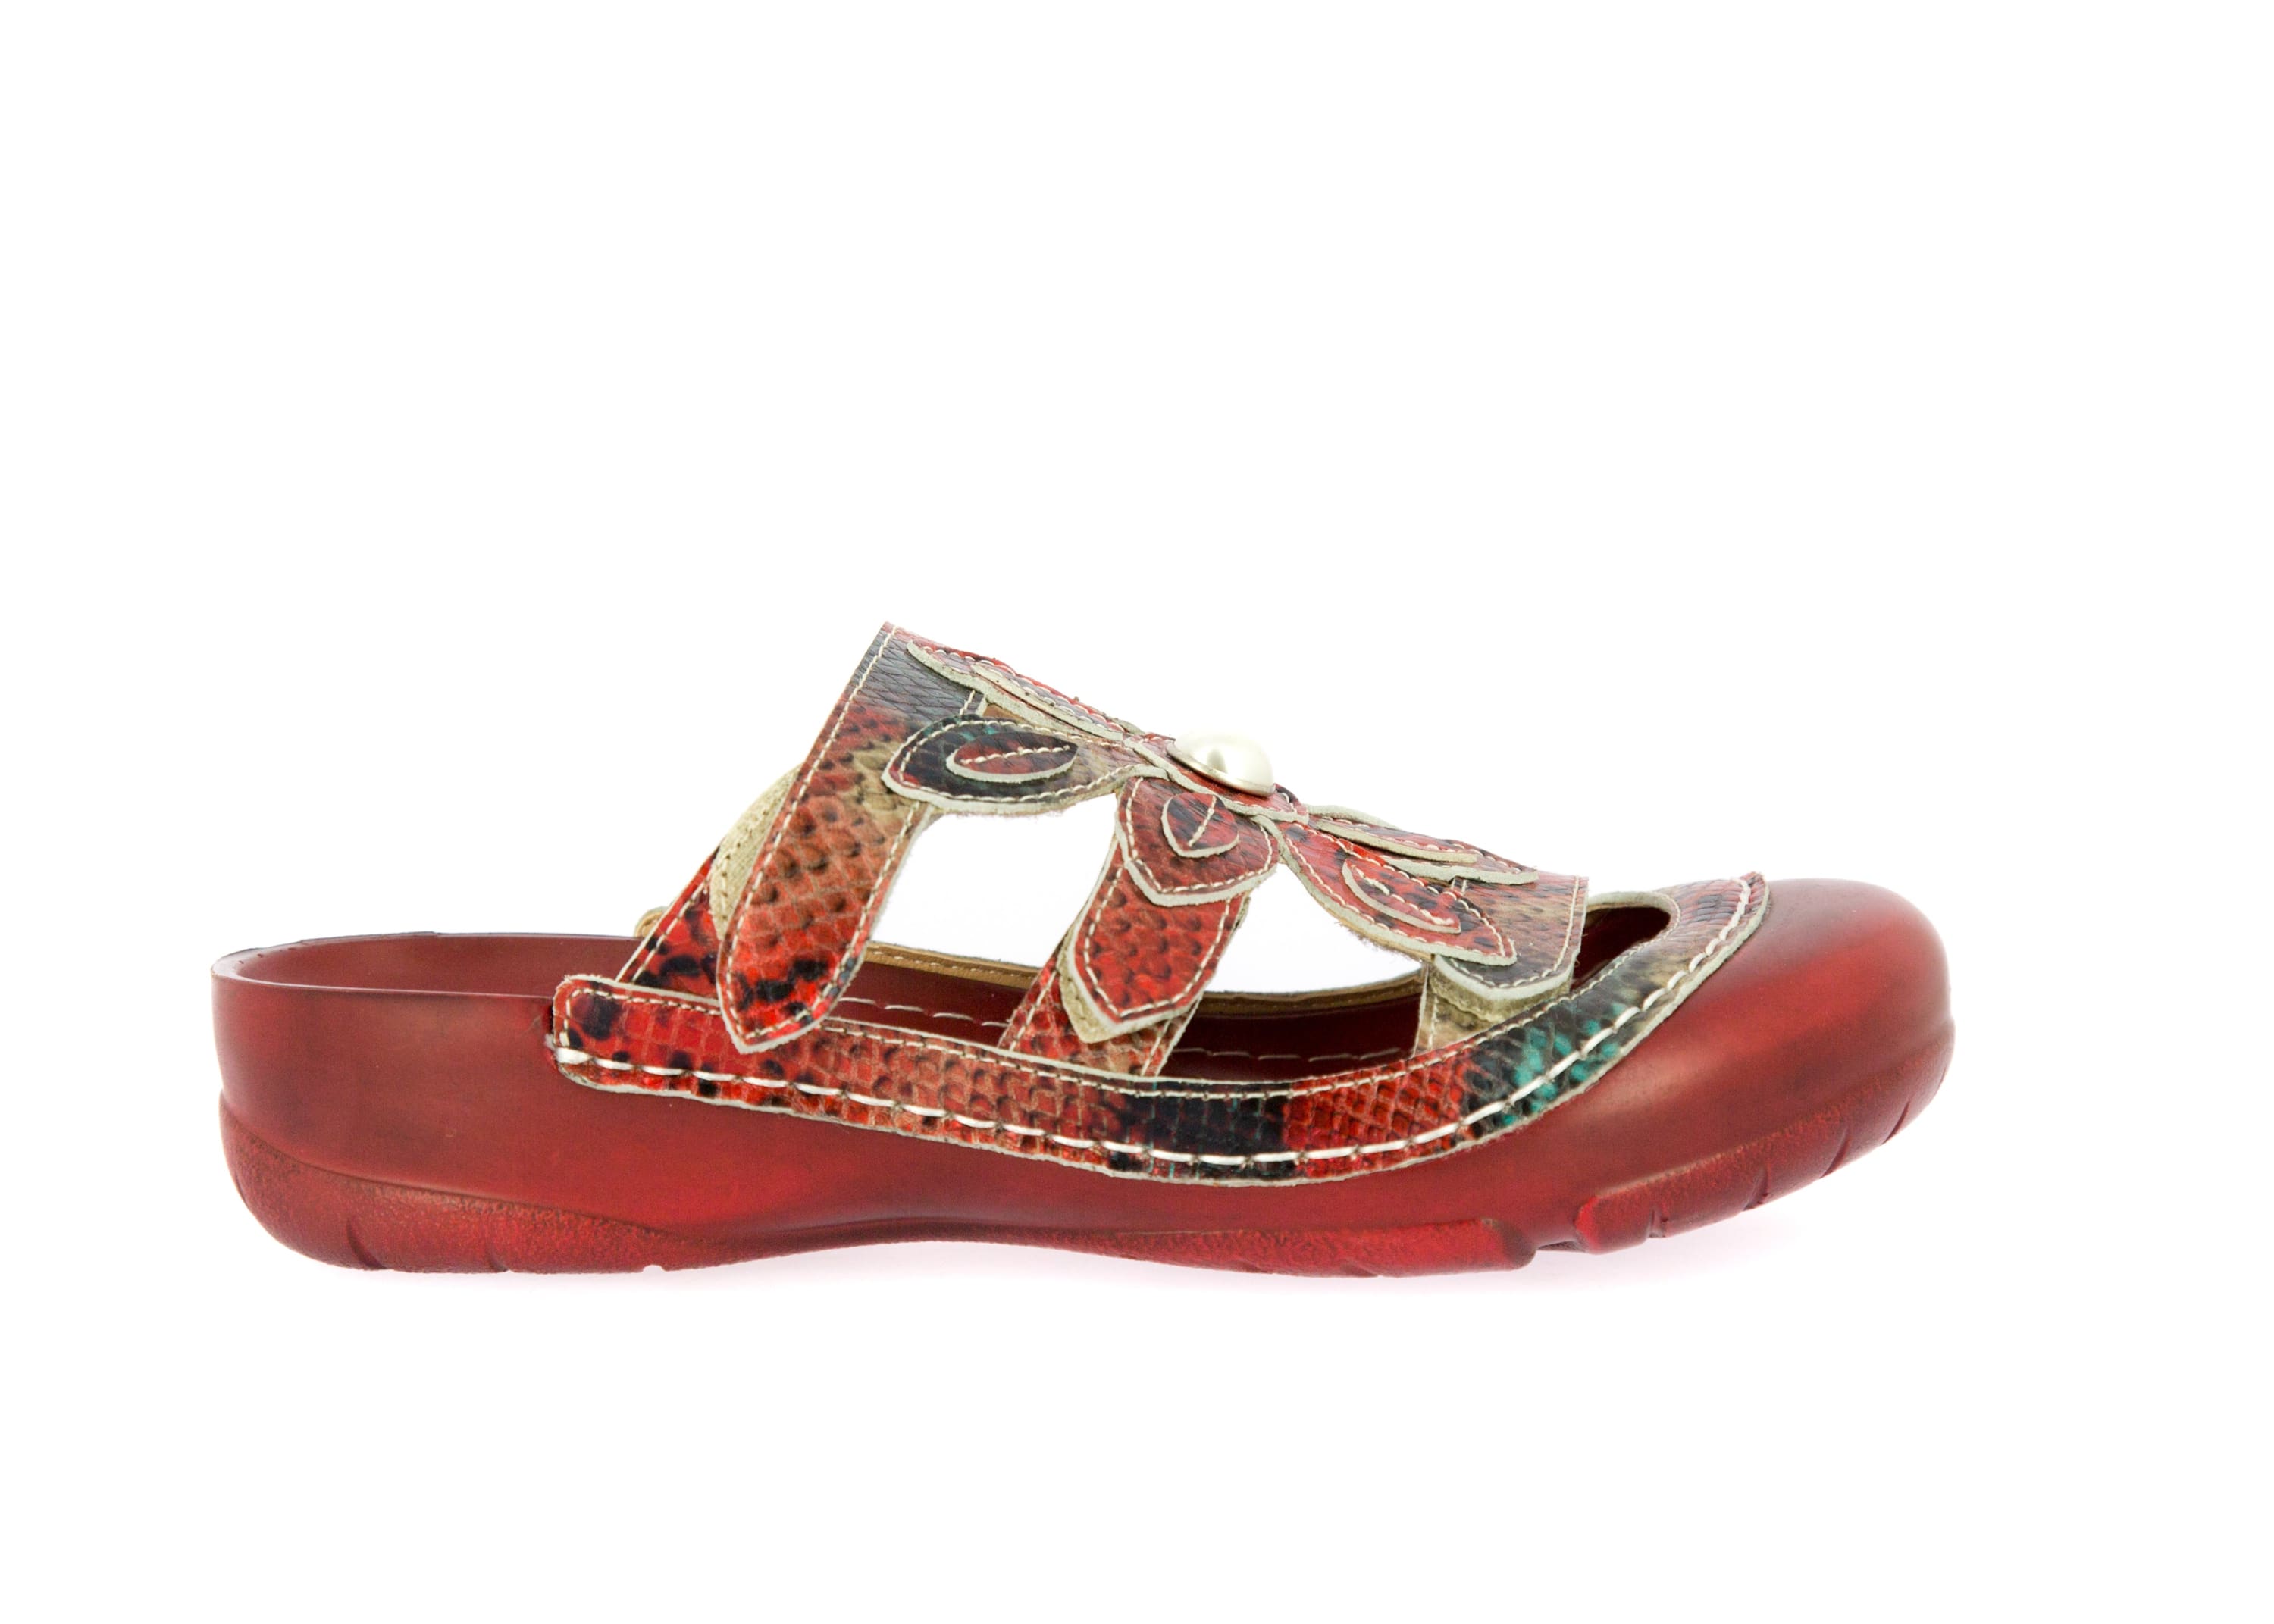 Chaussures BIANCA 11 - 35 / Rouge - Mule